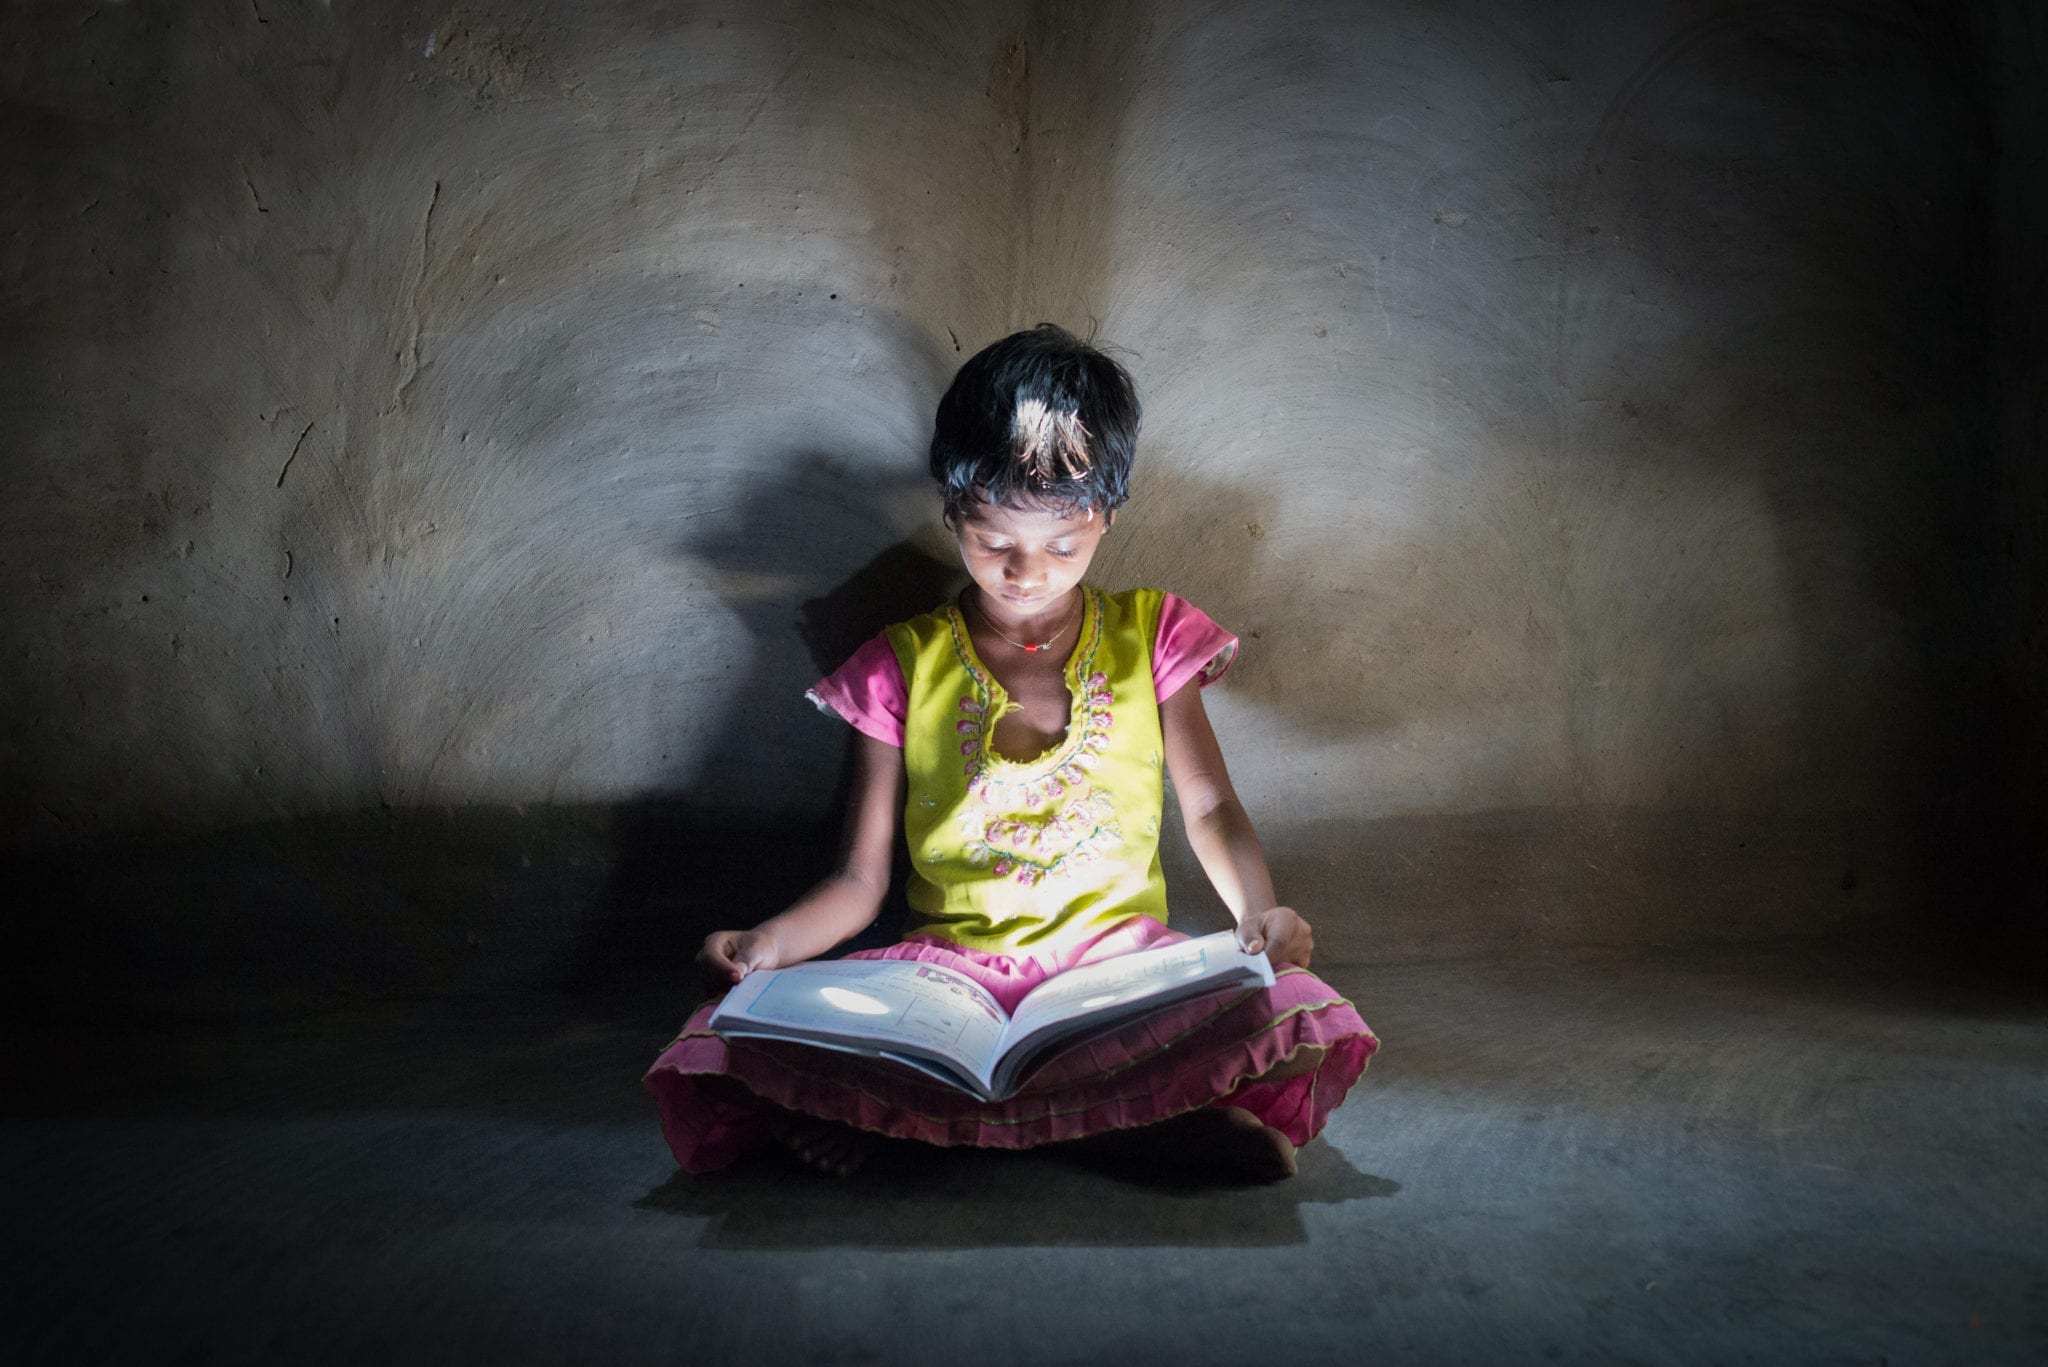 A young girl in India reads with the help of a light.